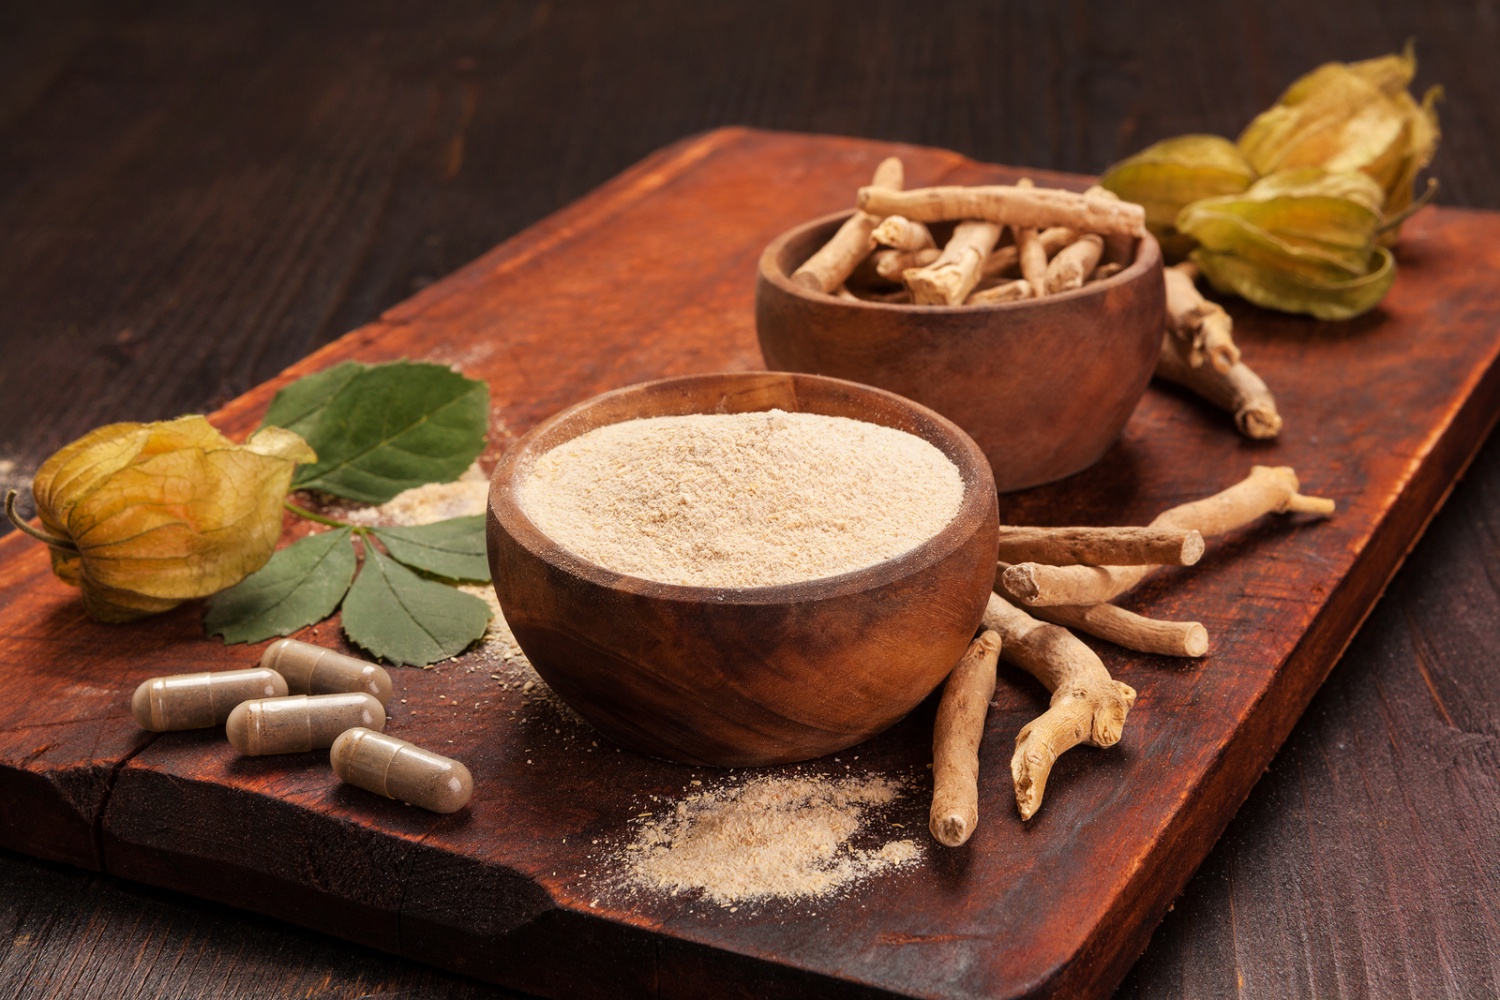 Roots and powder of Ashwagandha also known as Indian ginseng on wooden background.